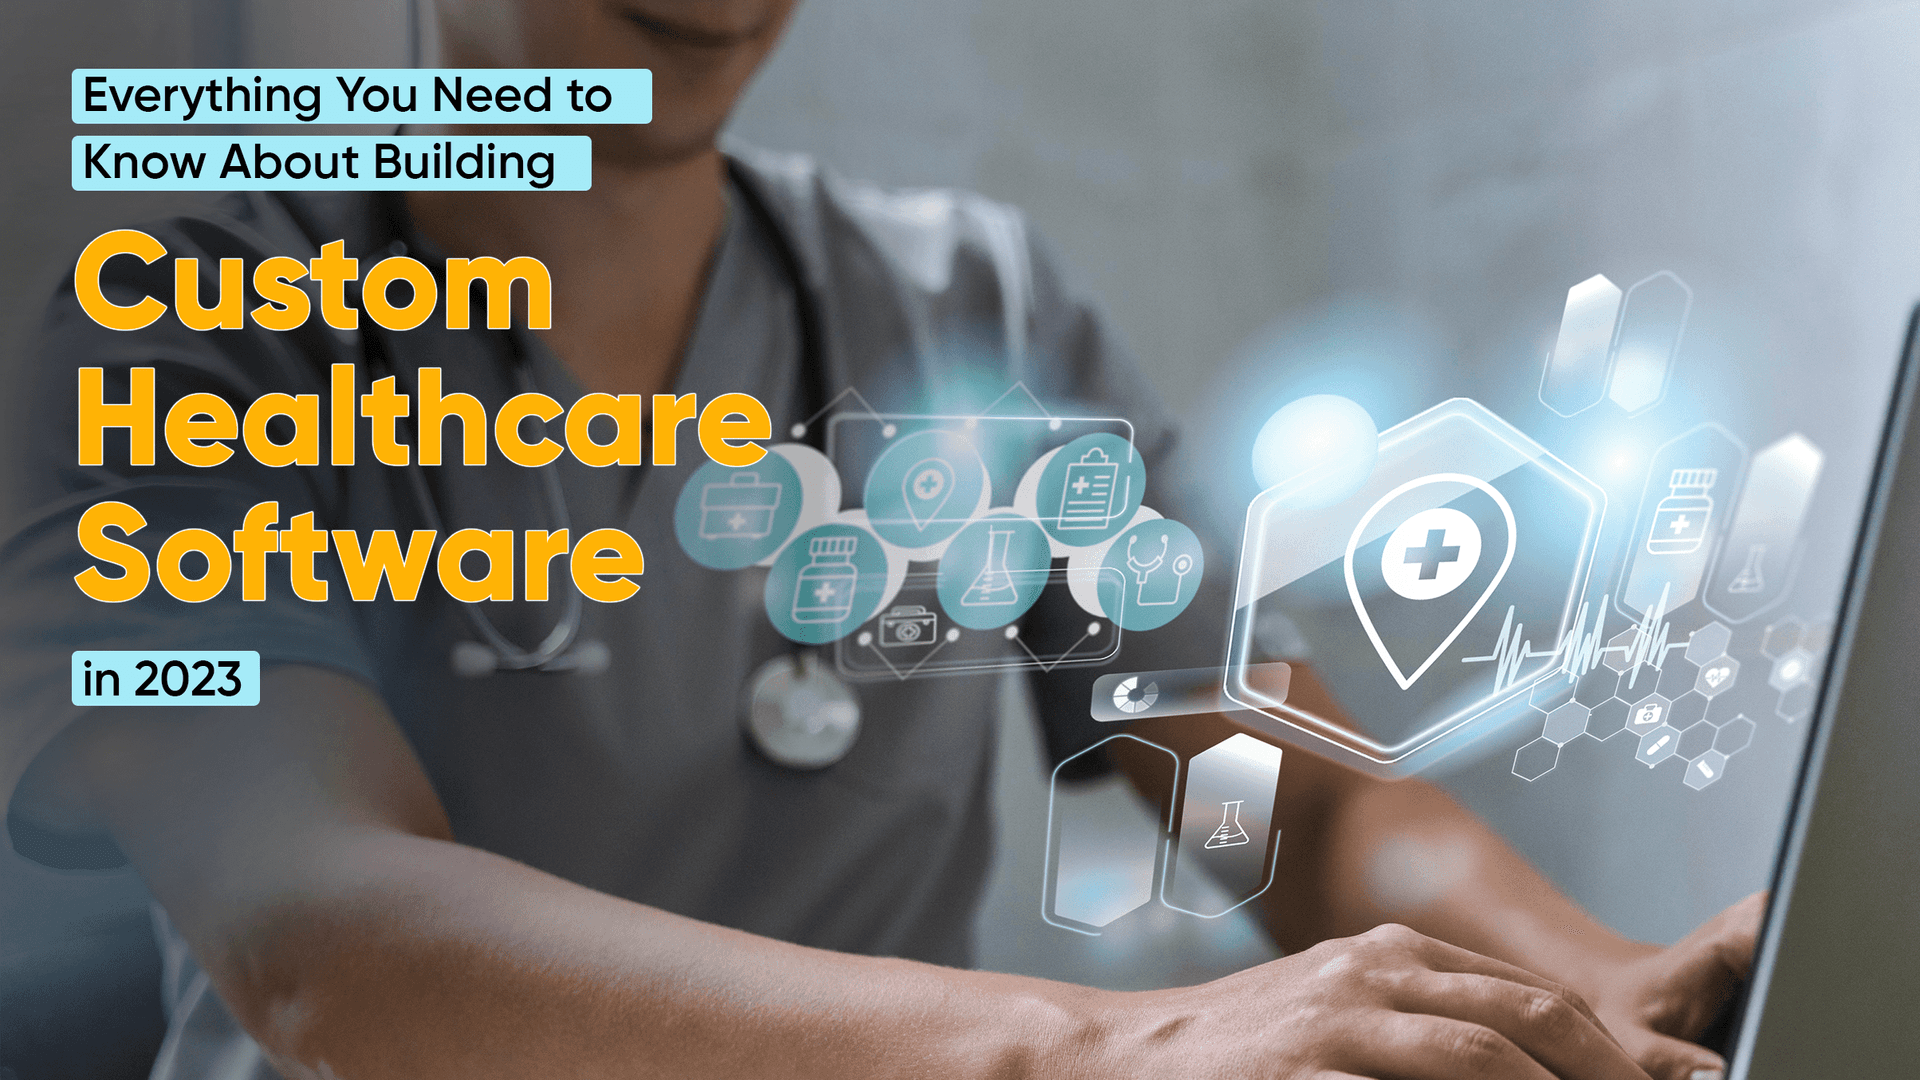 Everything You Need to Know About Building Custom Healthcare Software in 2023